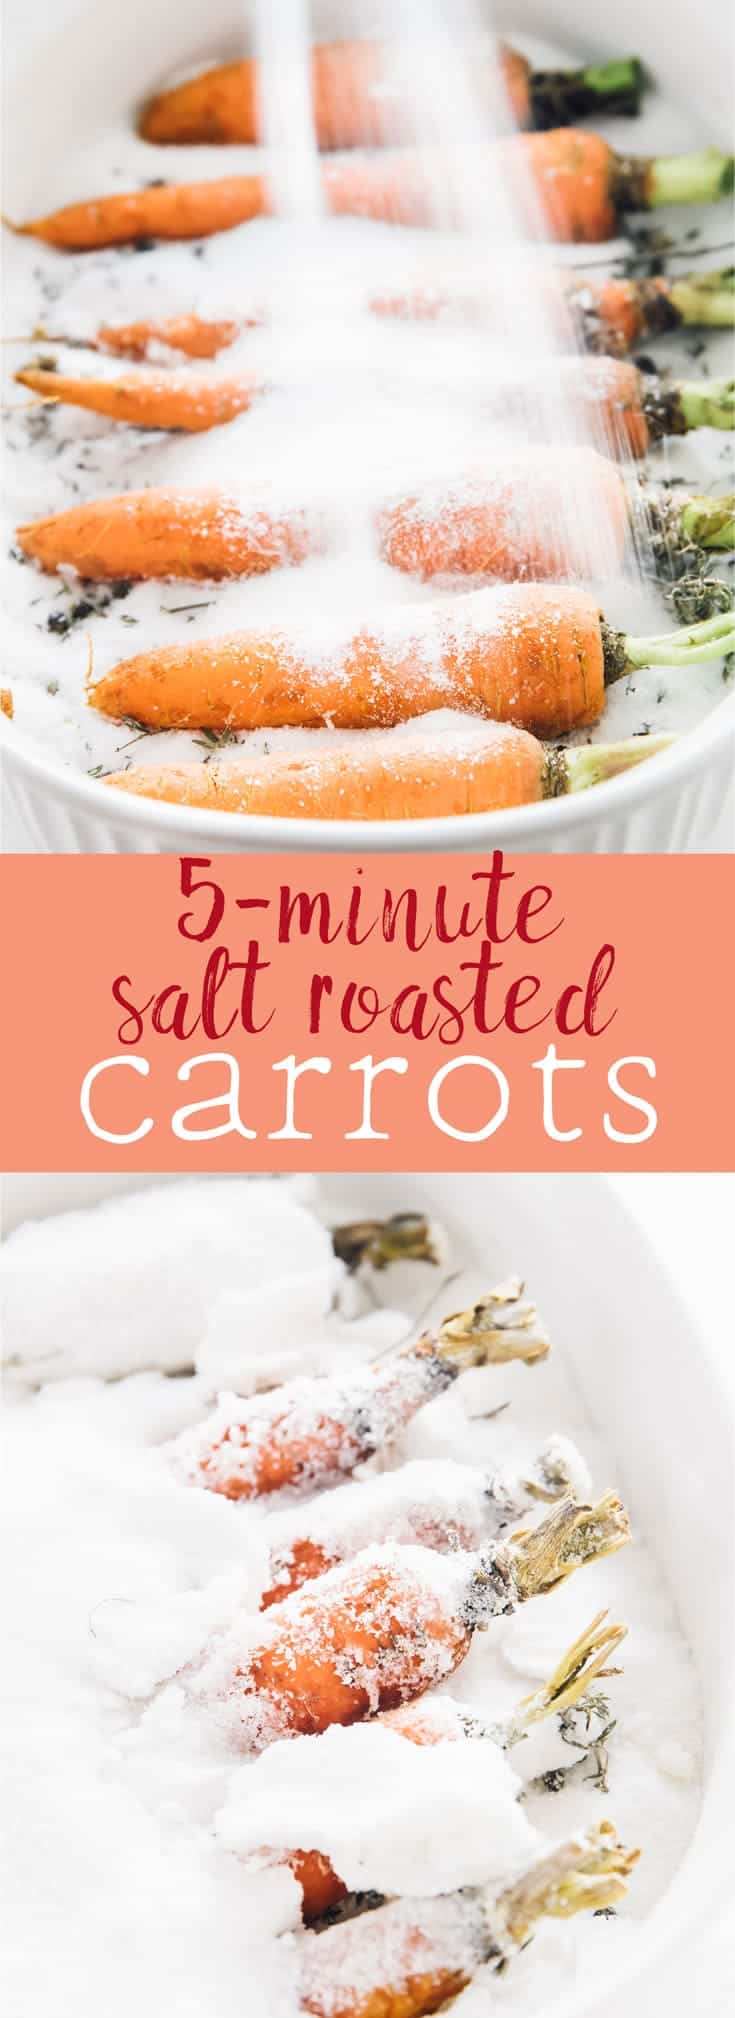 These Salt Roasted Carrots are a MUST try! The roasted carrots are perfectly seasoned, beautifully caramelised, and taste absolutely divine! So easy, and you can roast more veggies in the salt! via https://jessicainthekitchen.com